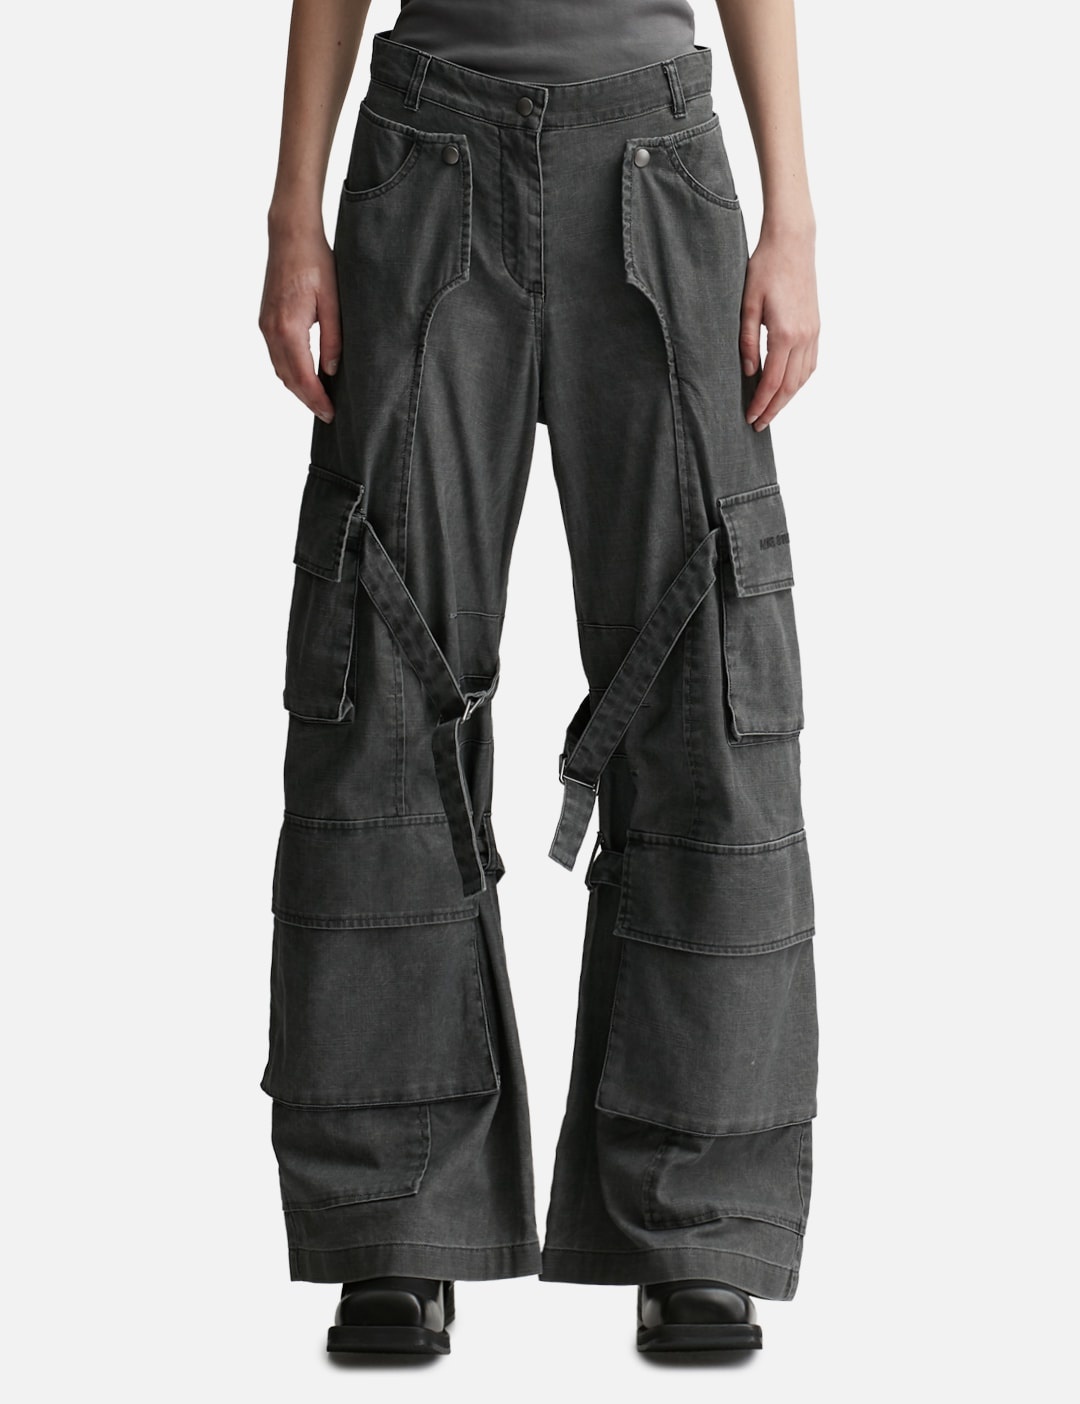 CARGO TROUSERS - 1